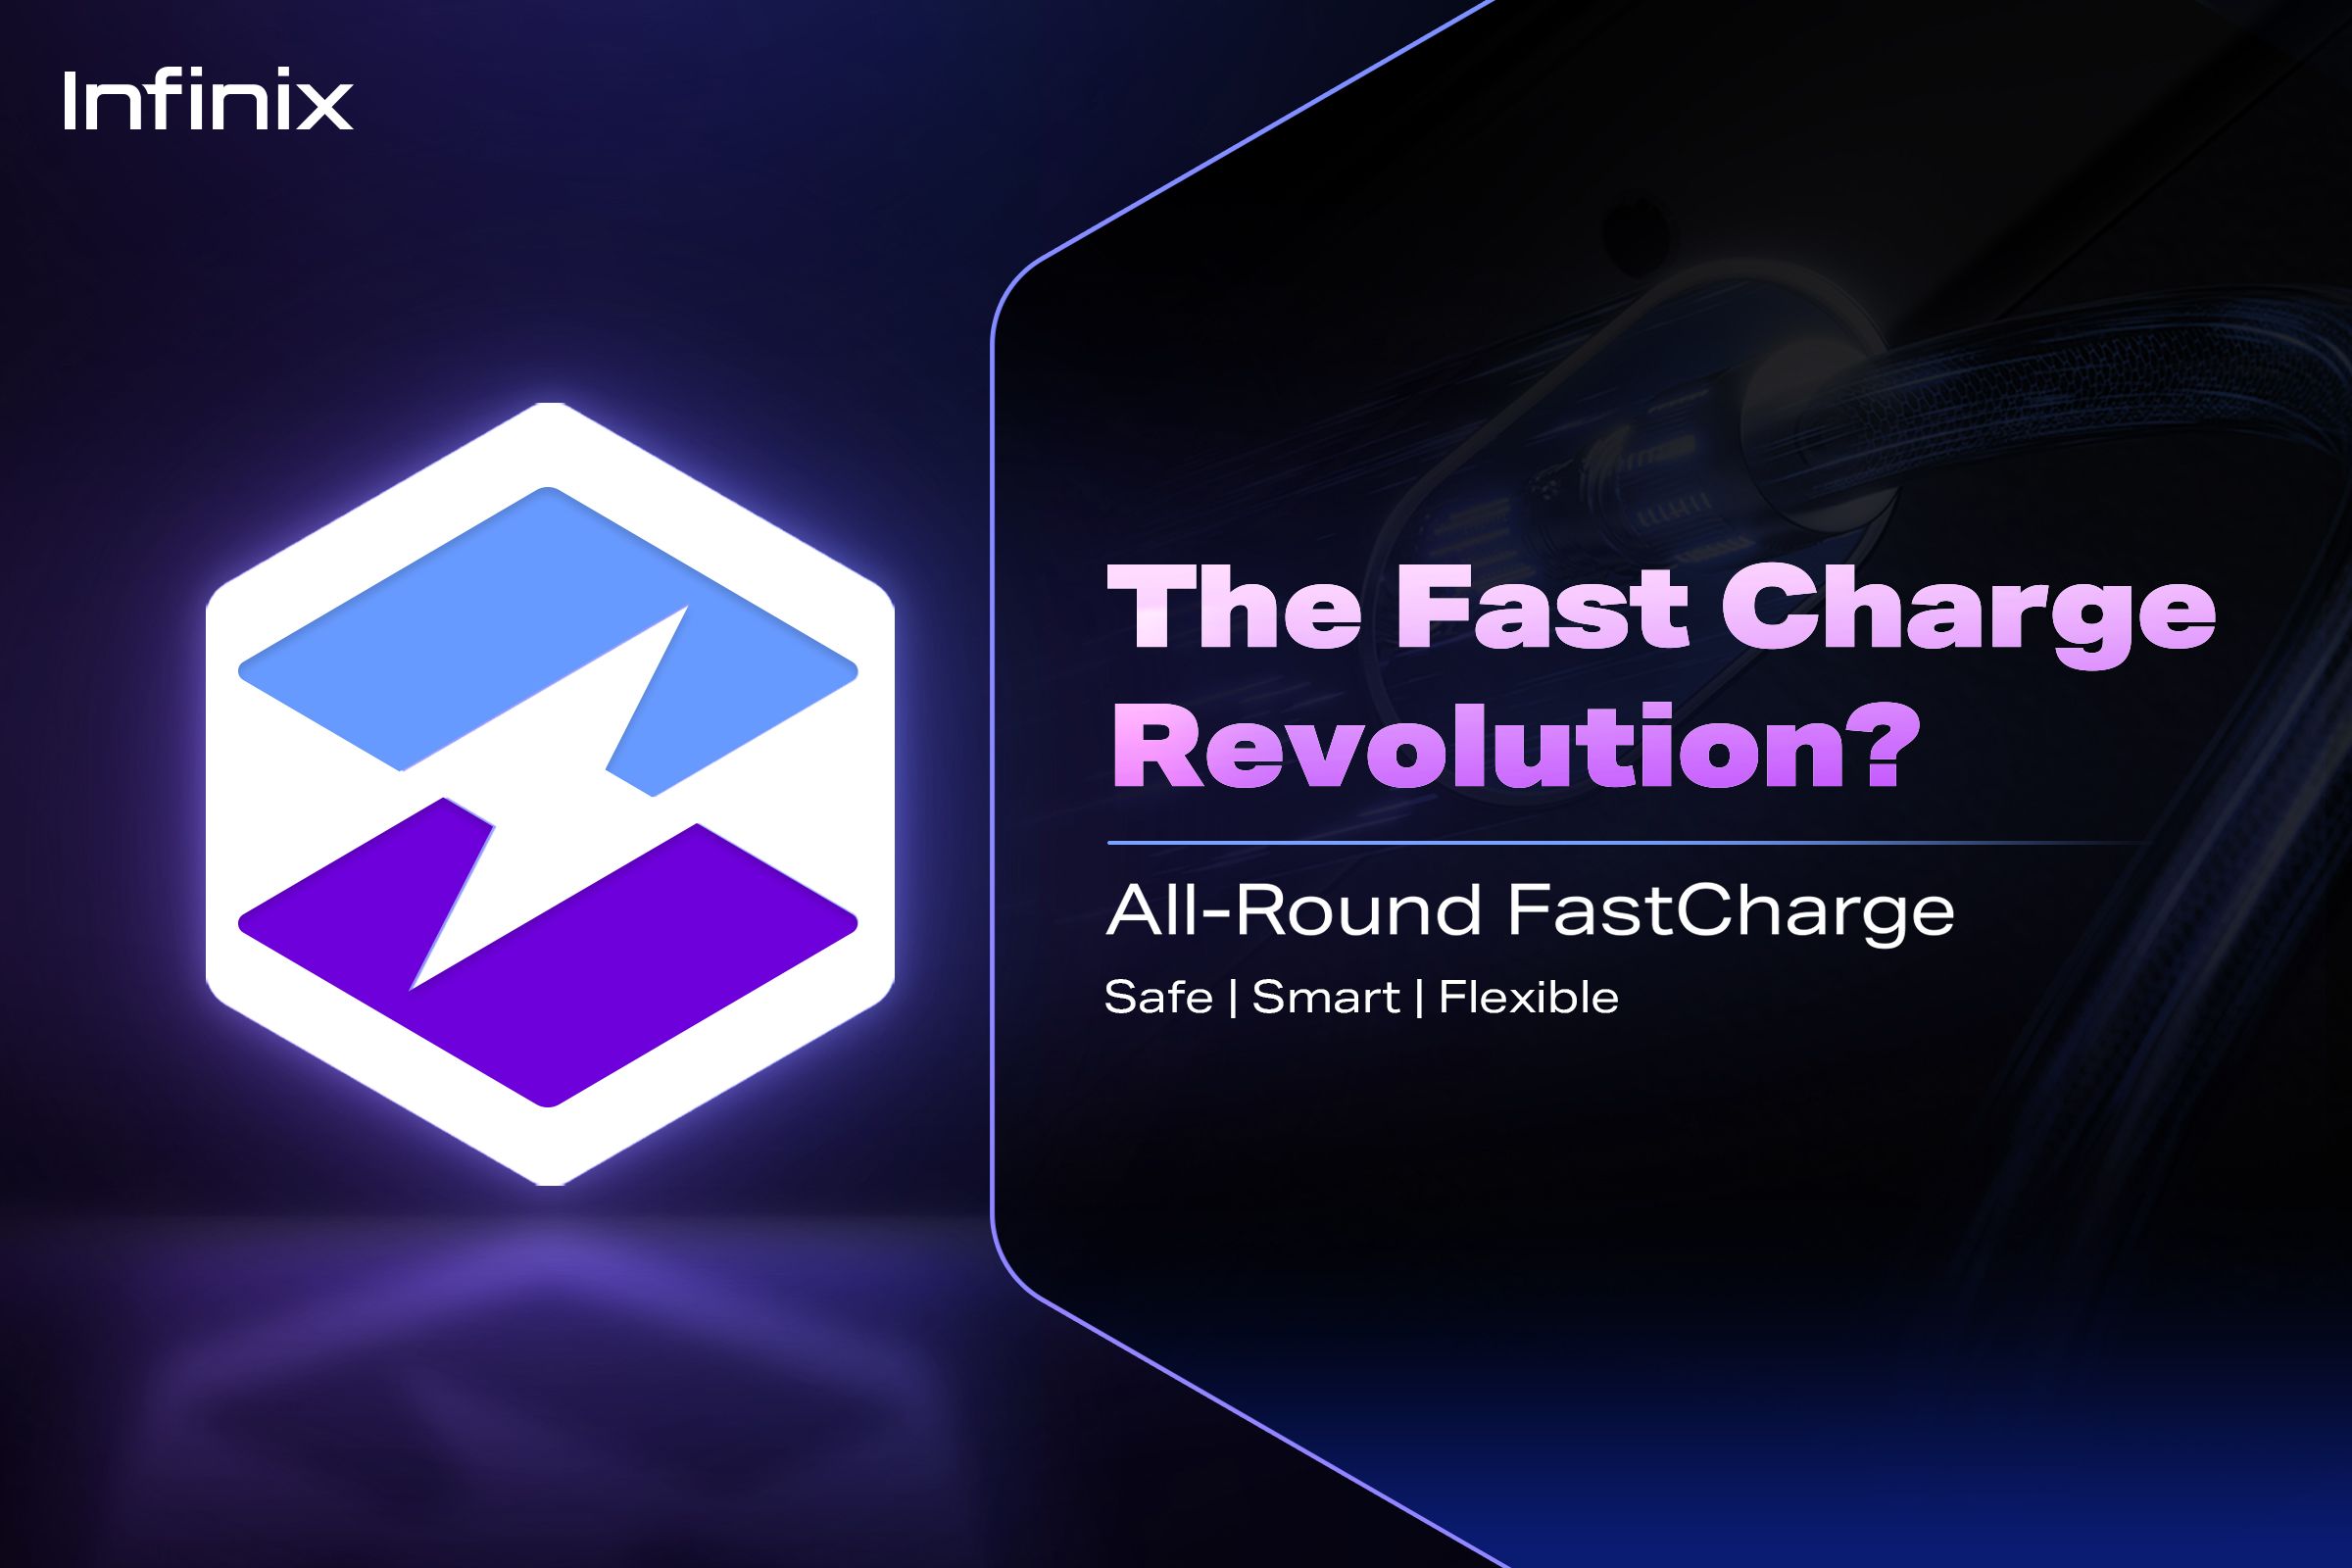 Infinix All-Round FastCharge concept